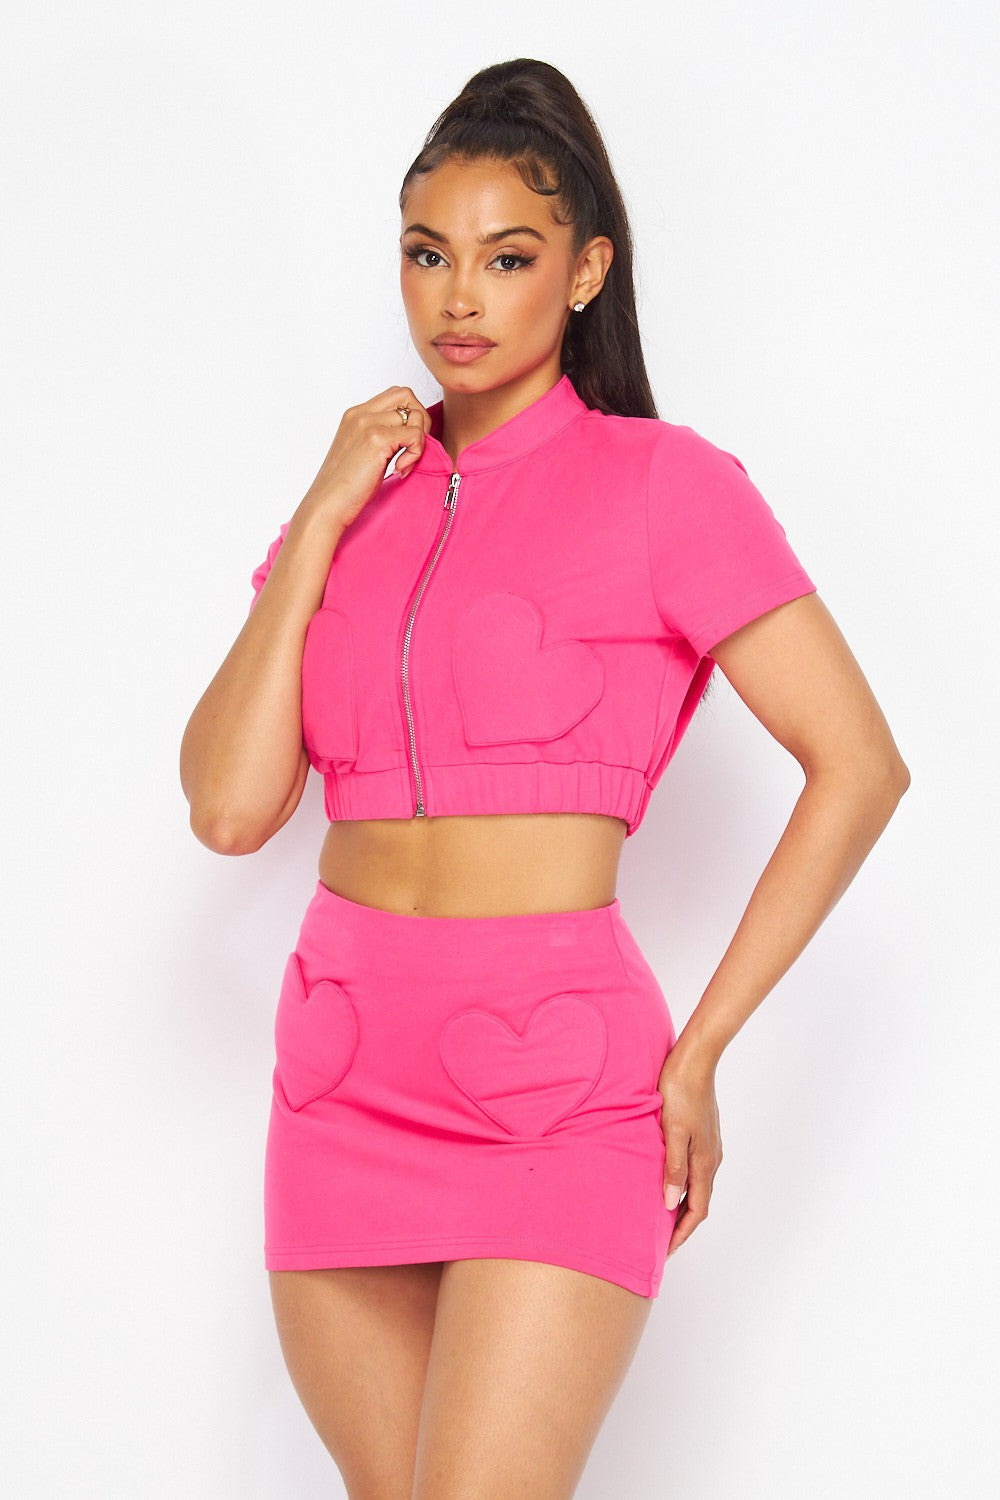 Chase Me Heart Pocket Zip Up Top and Skirt Set